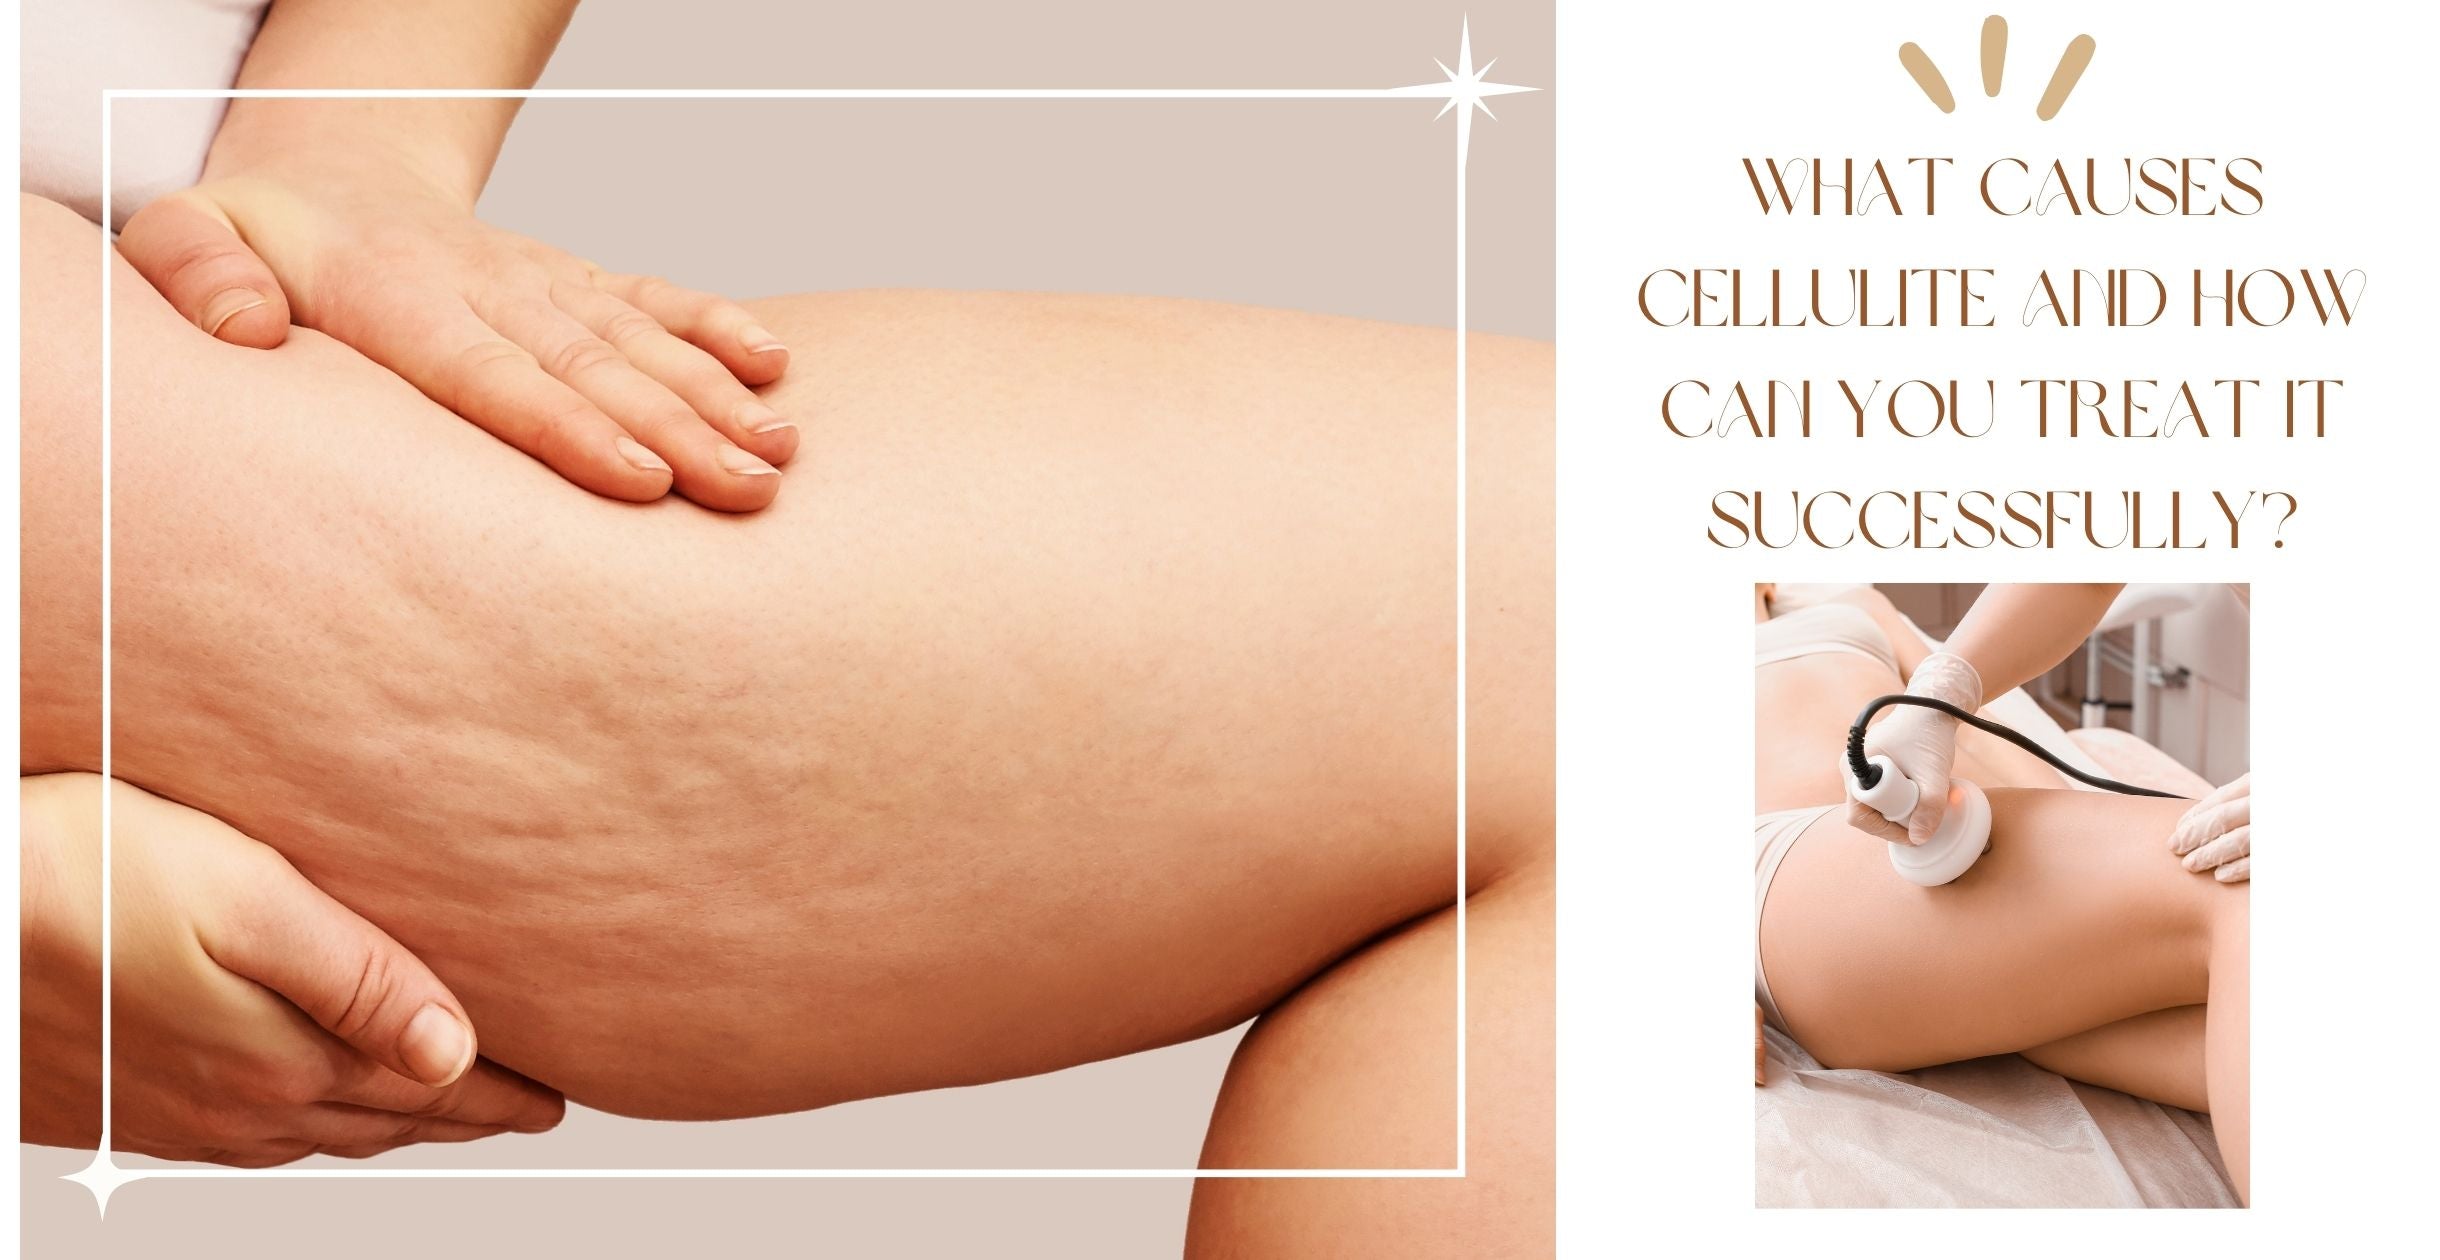 What Causes Cellulite and How Can You Treat It Successfully?